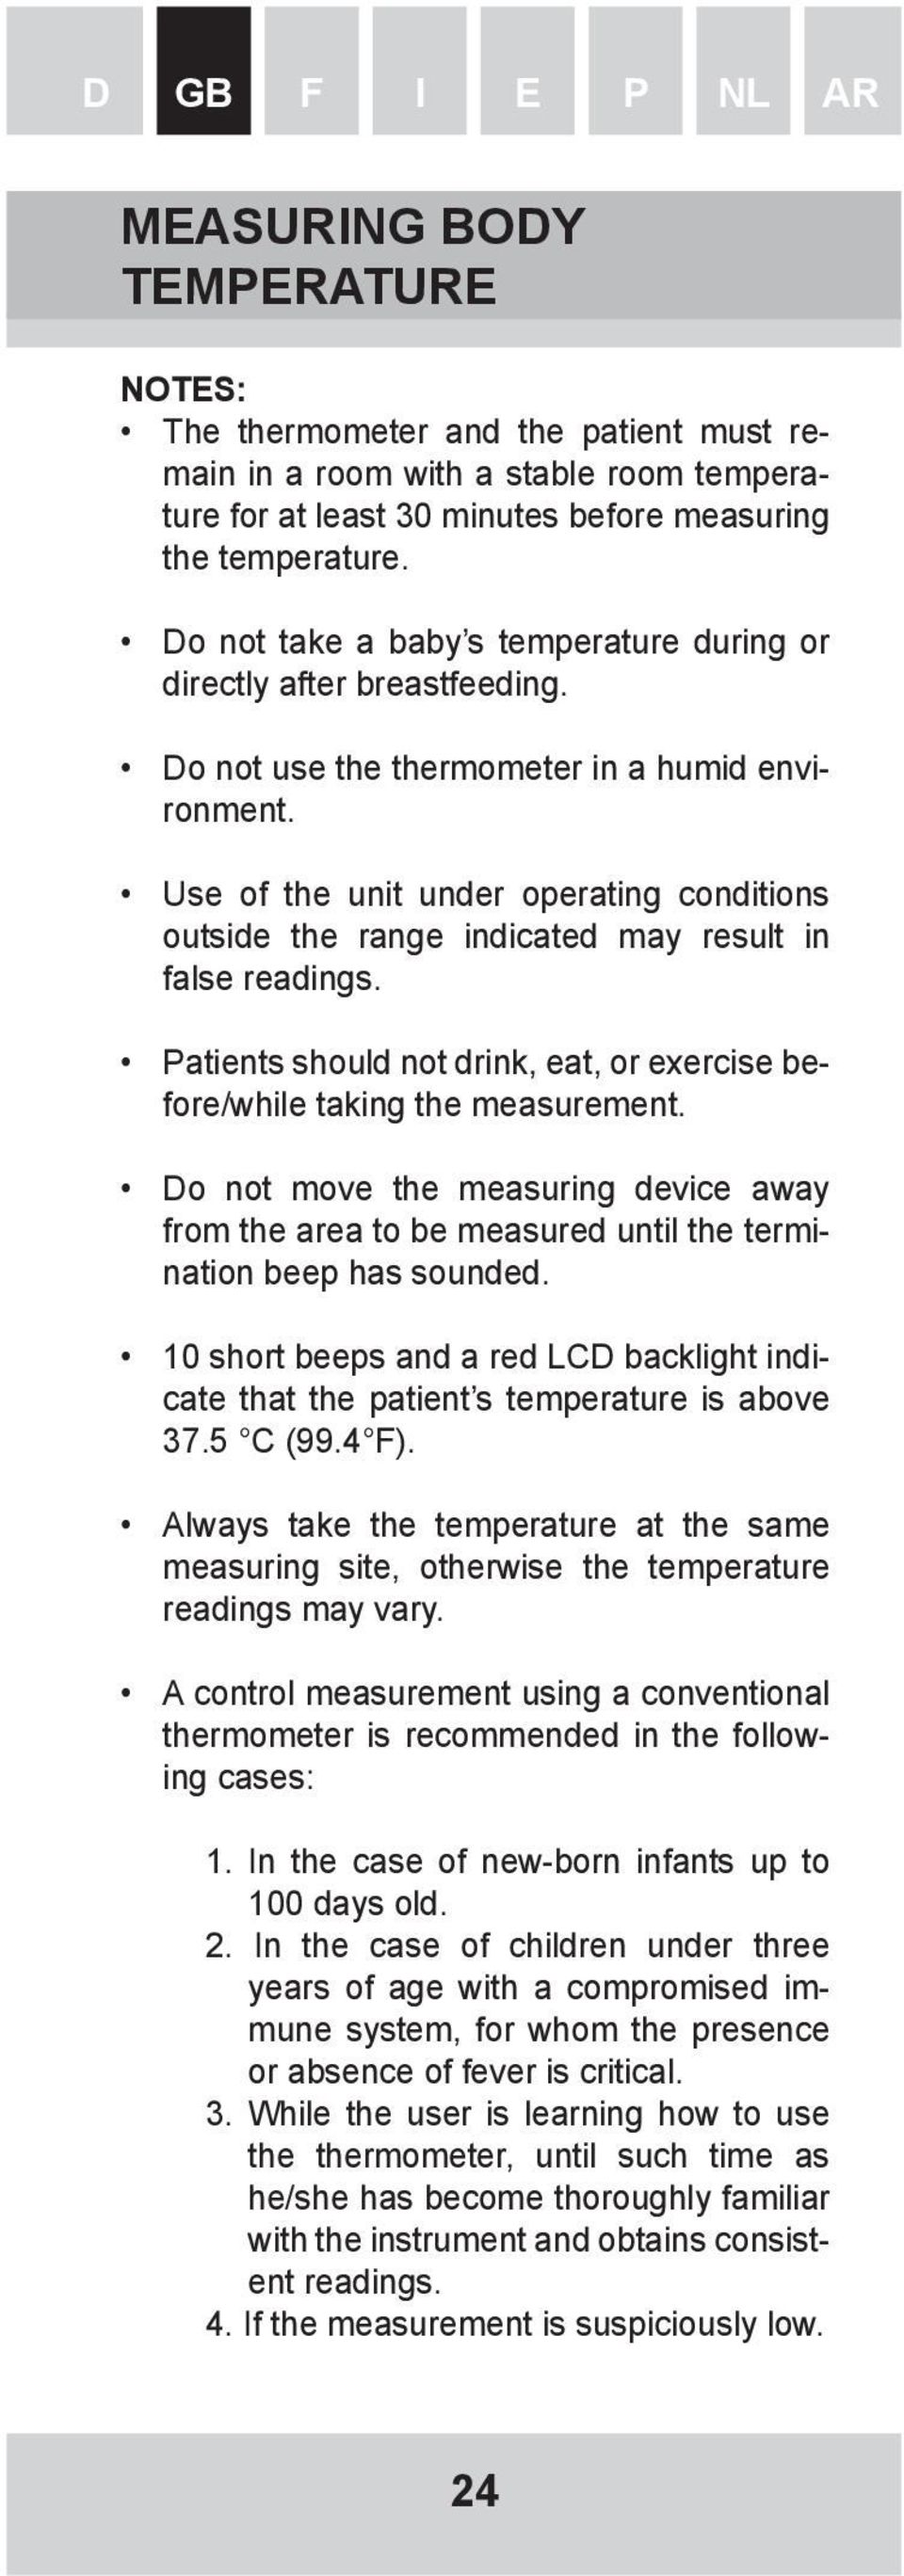 Use of the unit under operating conditions outside the range indicated may result in false readings. Patients should not drink, eat, or exercise before/while taking the measurement.